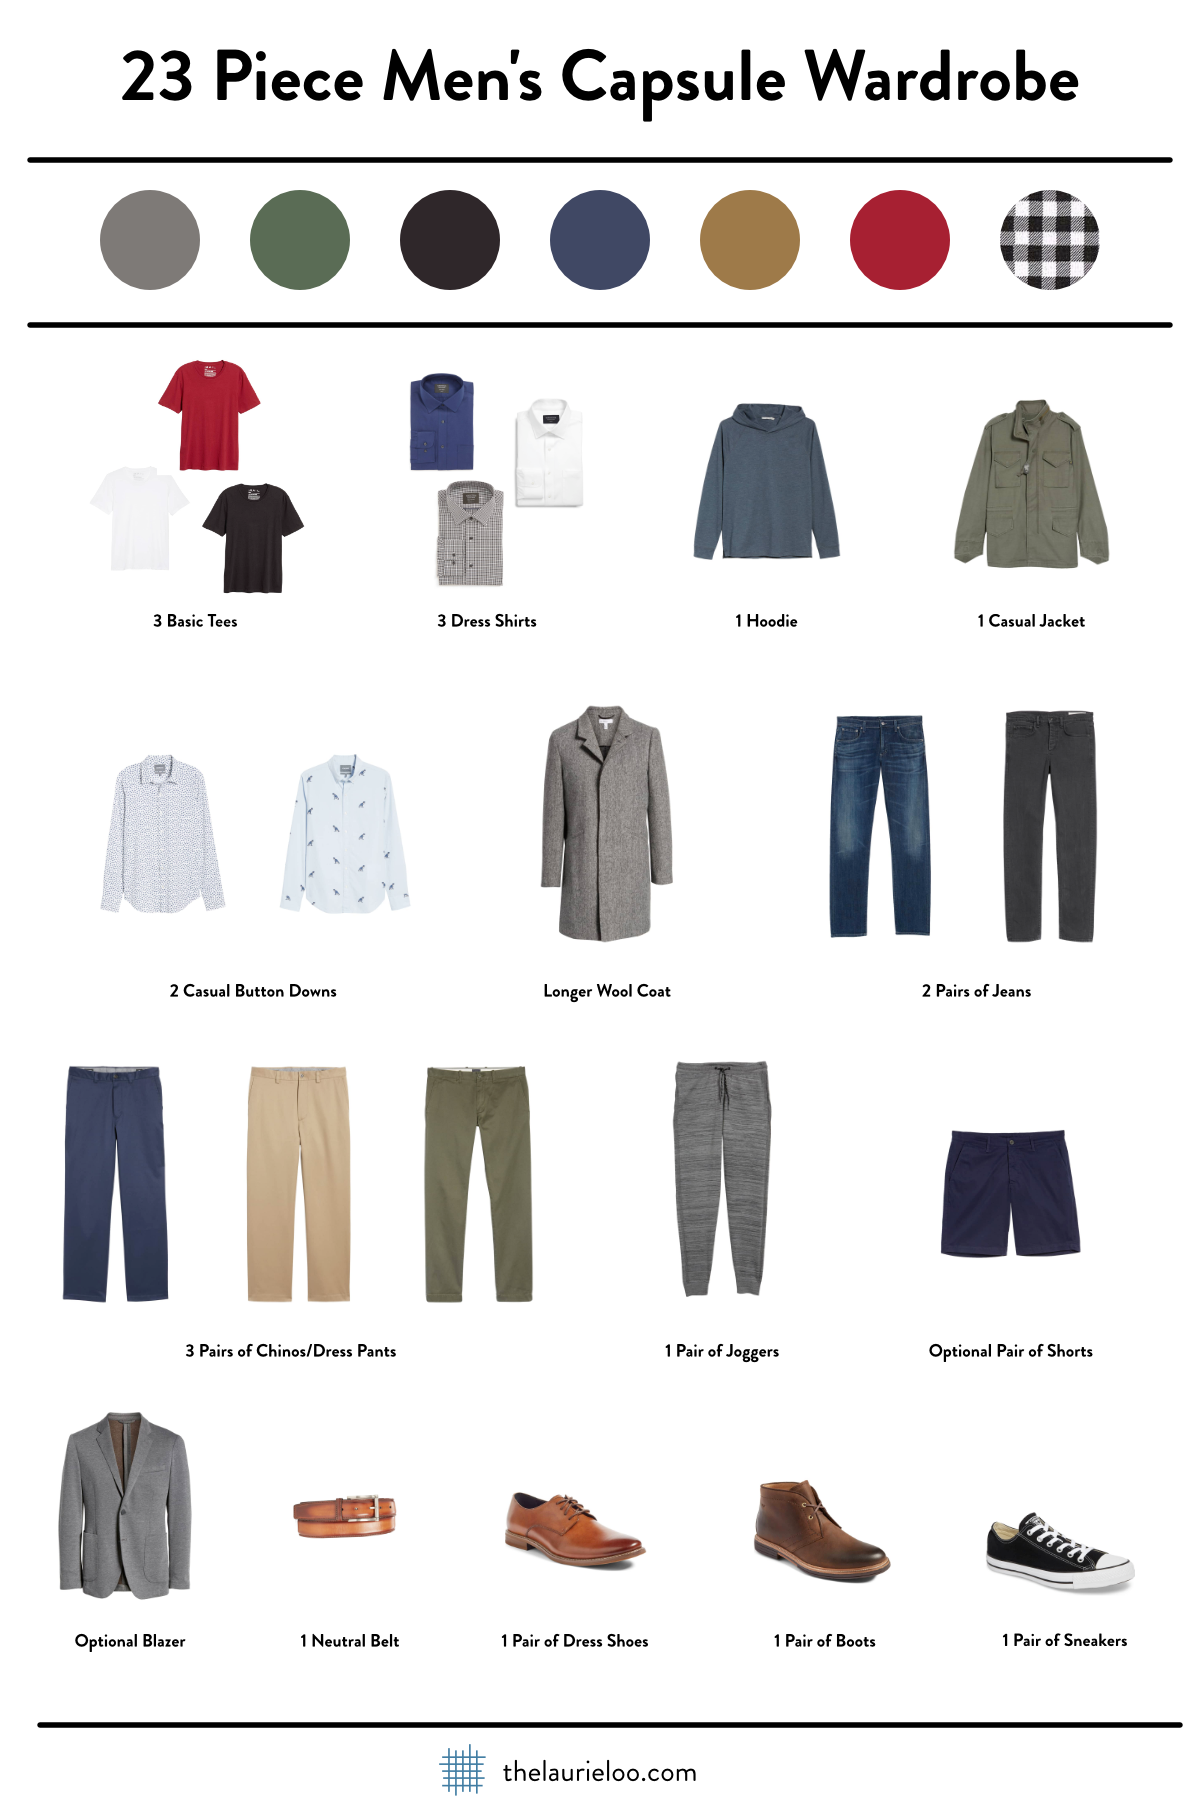 The Ultimate Capsule Wardrobe Guide for Men — The Laurie Loo